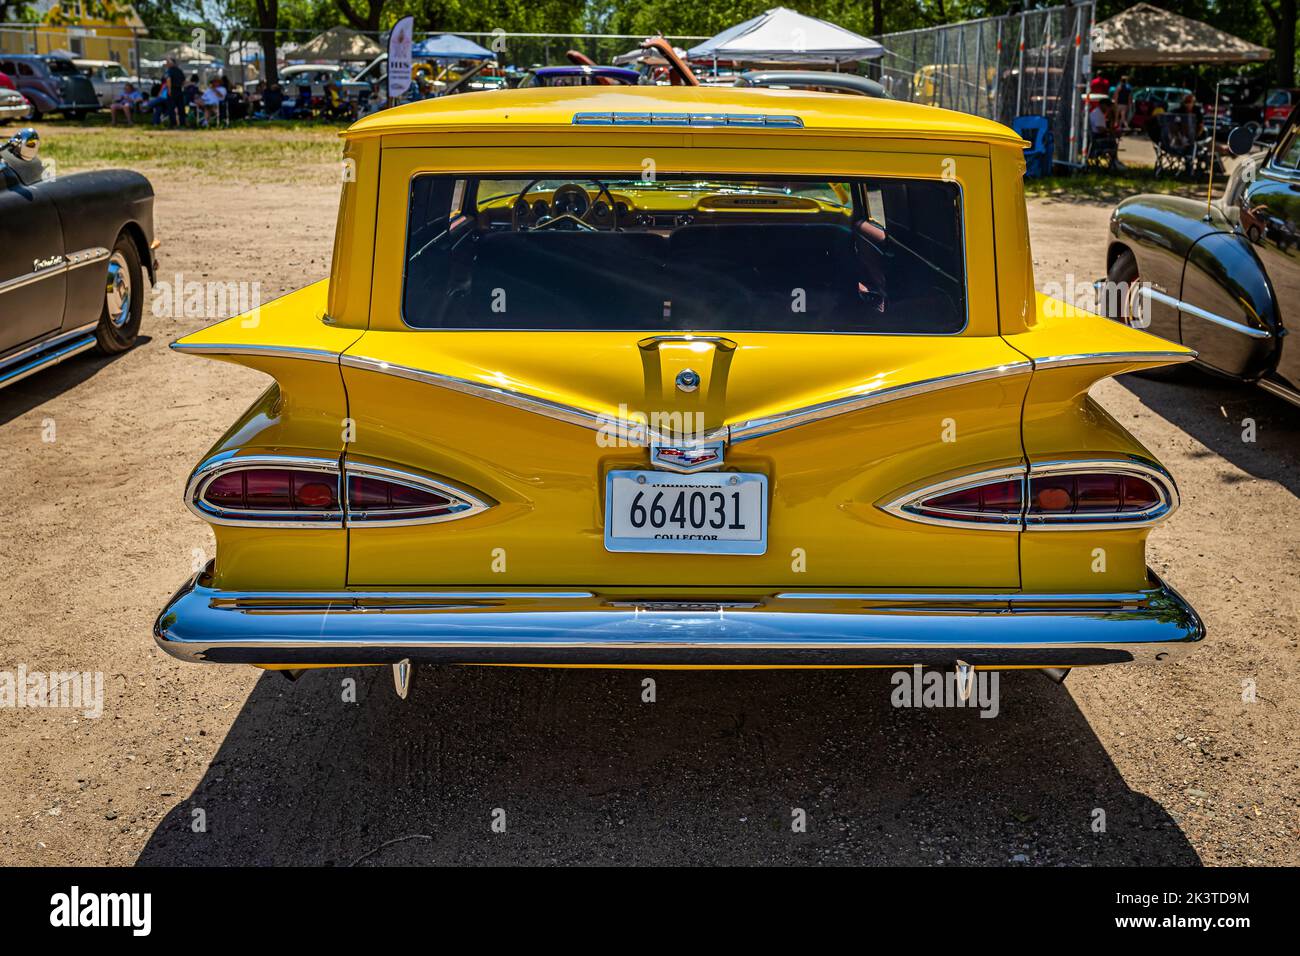 Falcon Heights, MN - June 18, 2022: High perspective rear view of a 1959 Chevrolet Biscayne Sedan Delivery at a local car show. Stock Photo